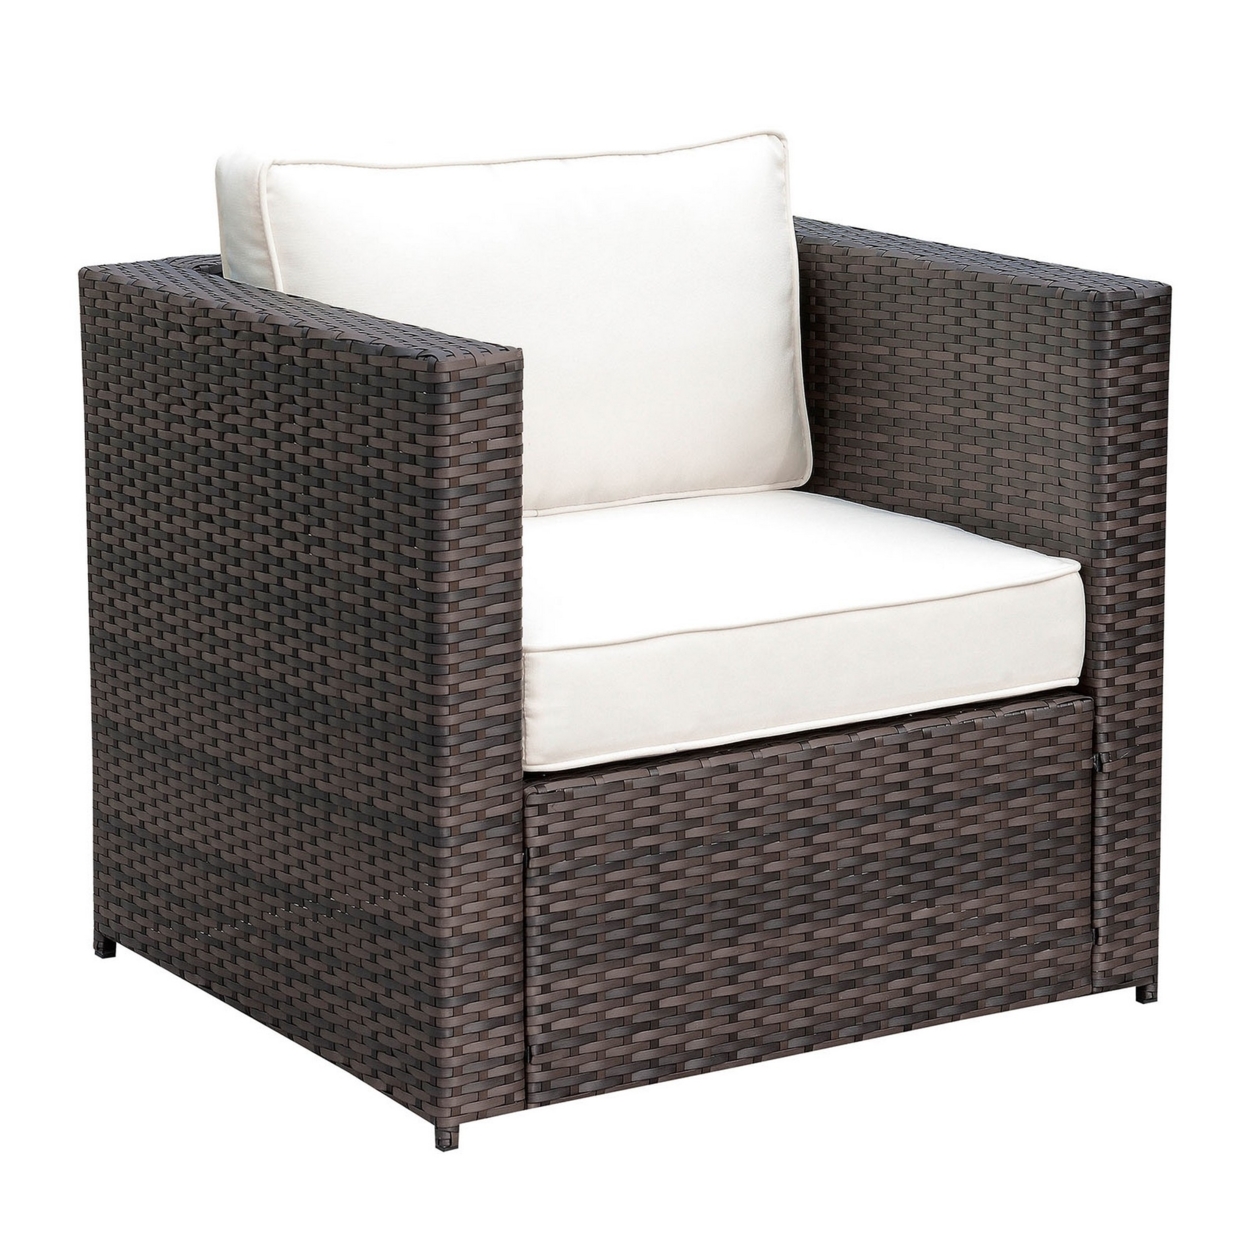 Aluminum Frame Patio Arm Chair With Cushioned Seating, Ivory & Espresso Brown- Saltoro Sherpi